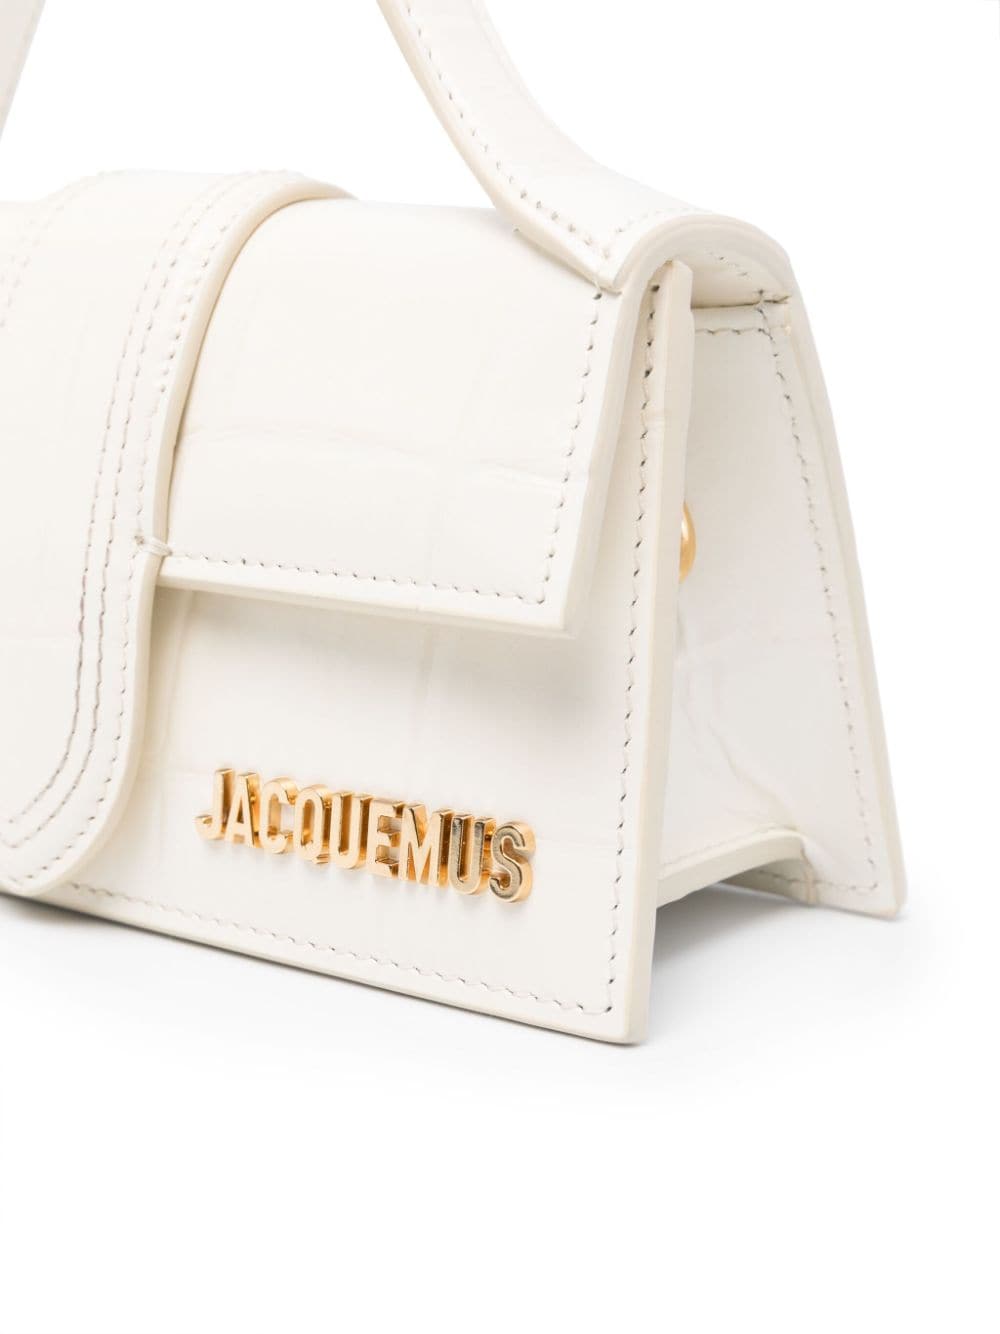 Jacquemus Bags.. Ivory